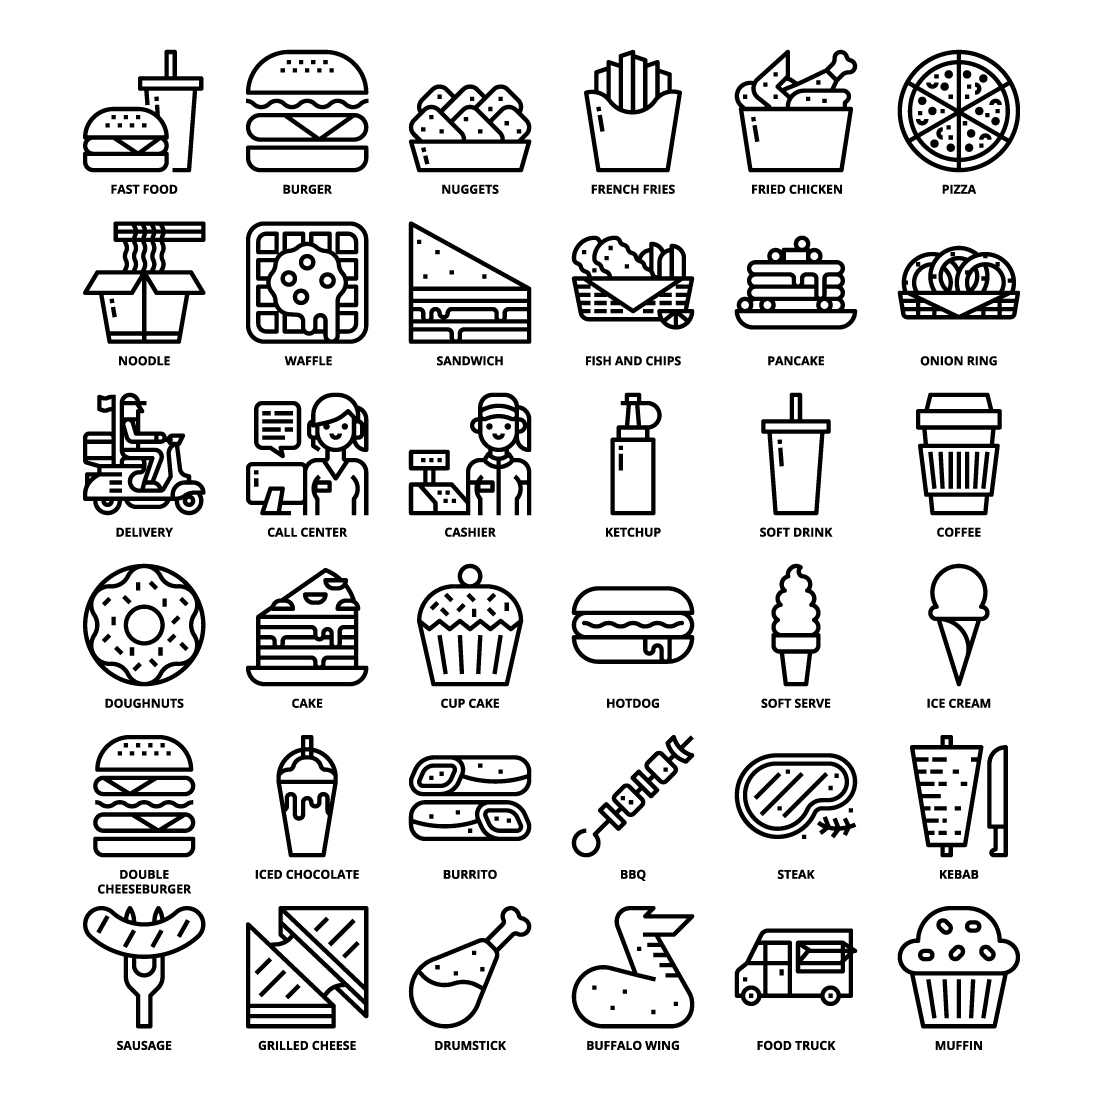 36 Fast Food Icons Set x 4 Styles preview image.